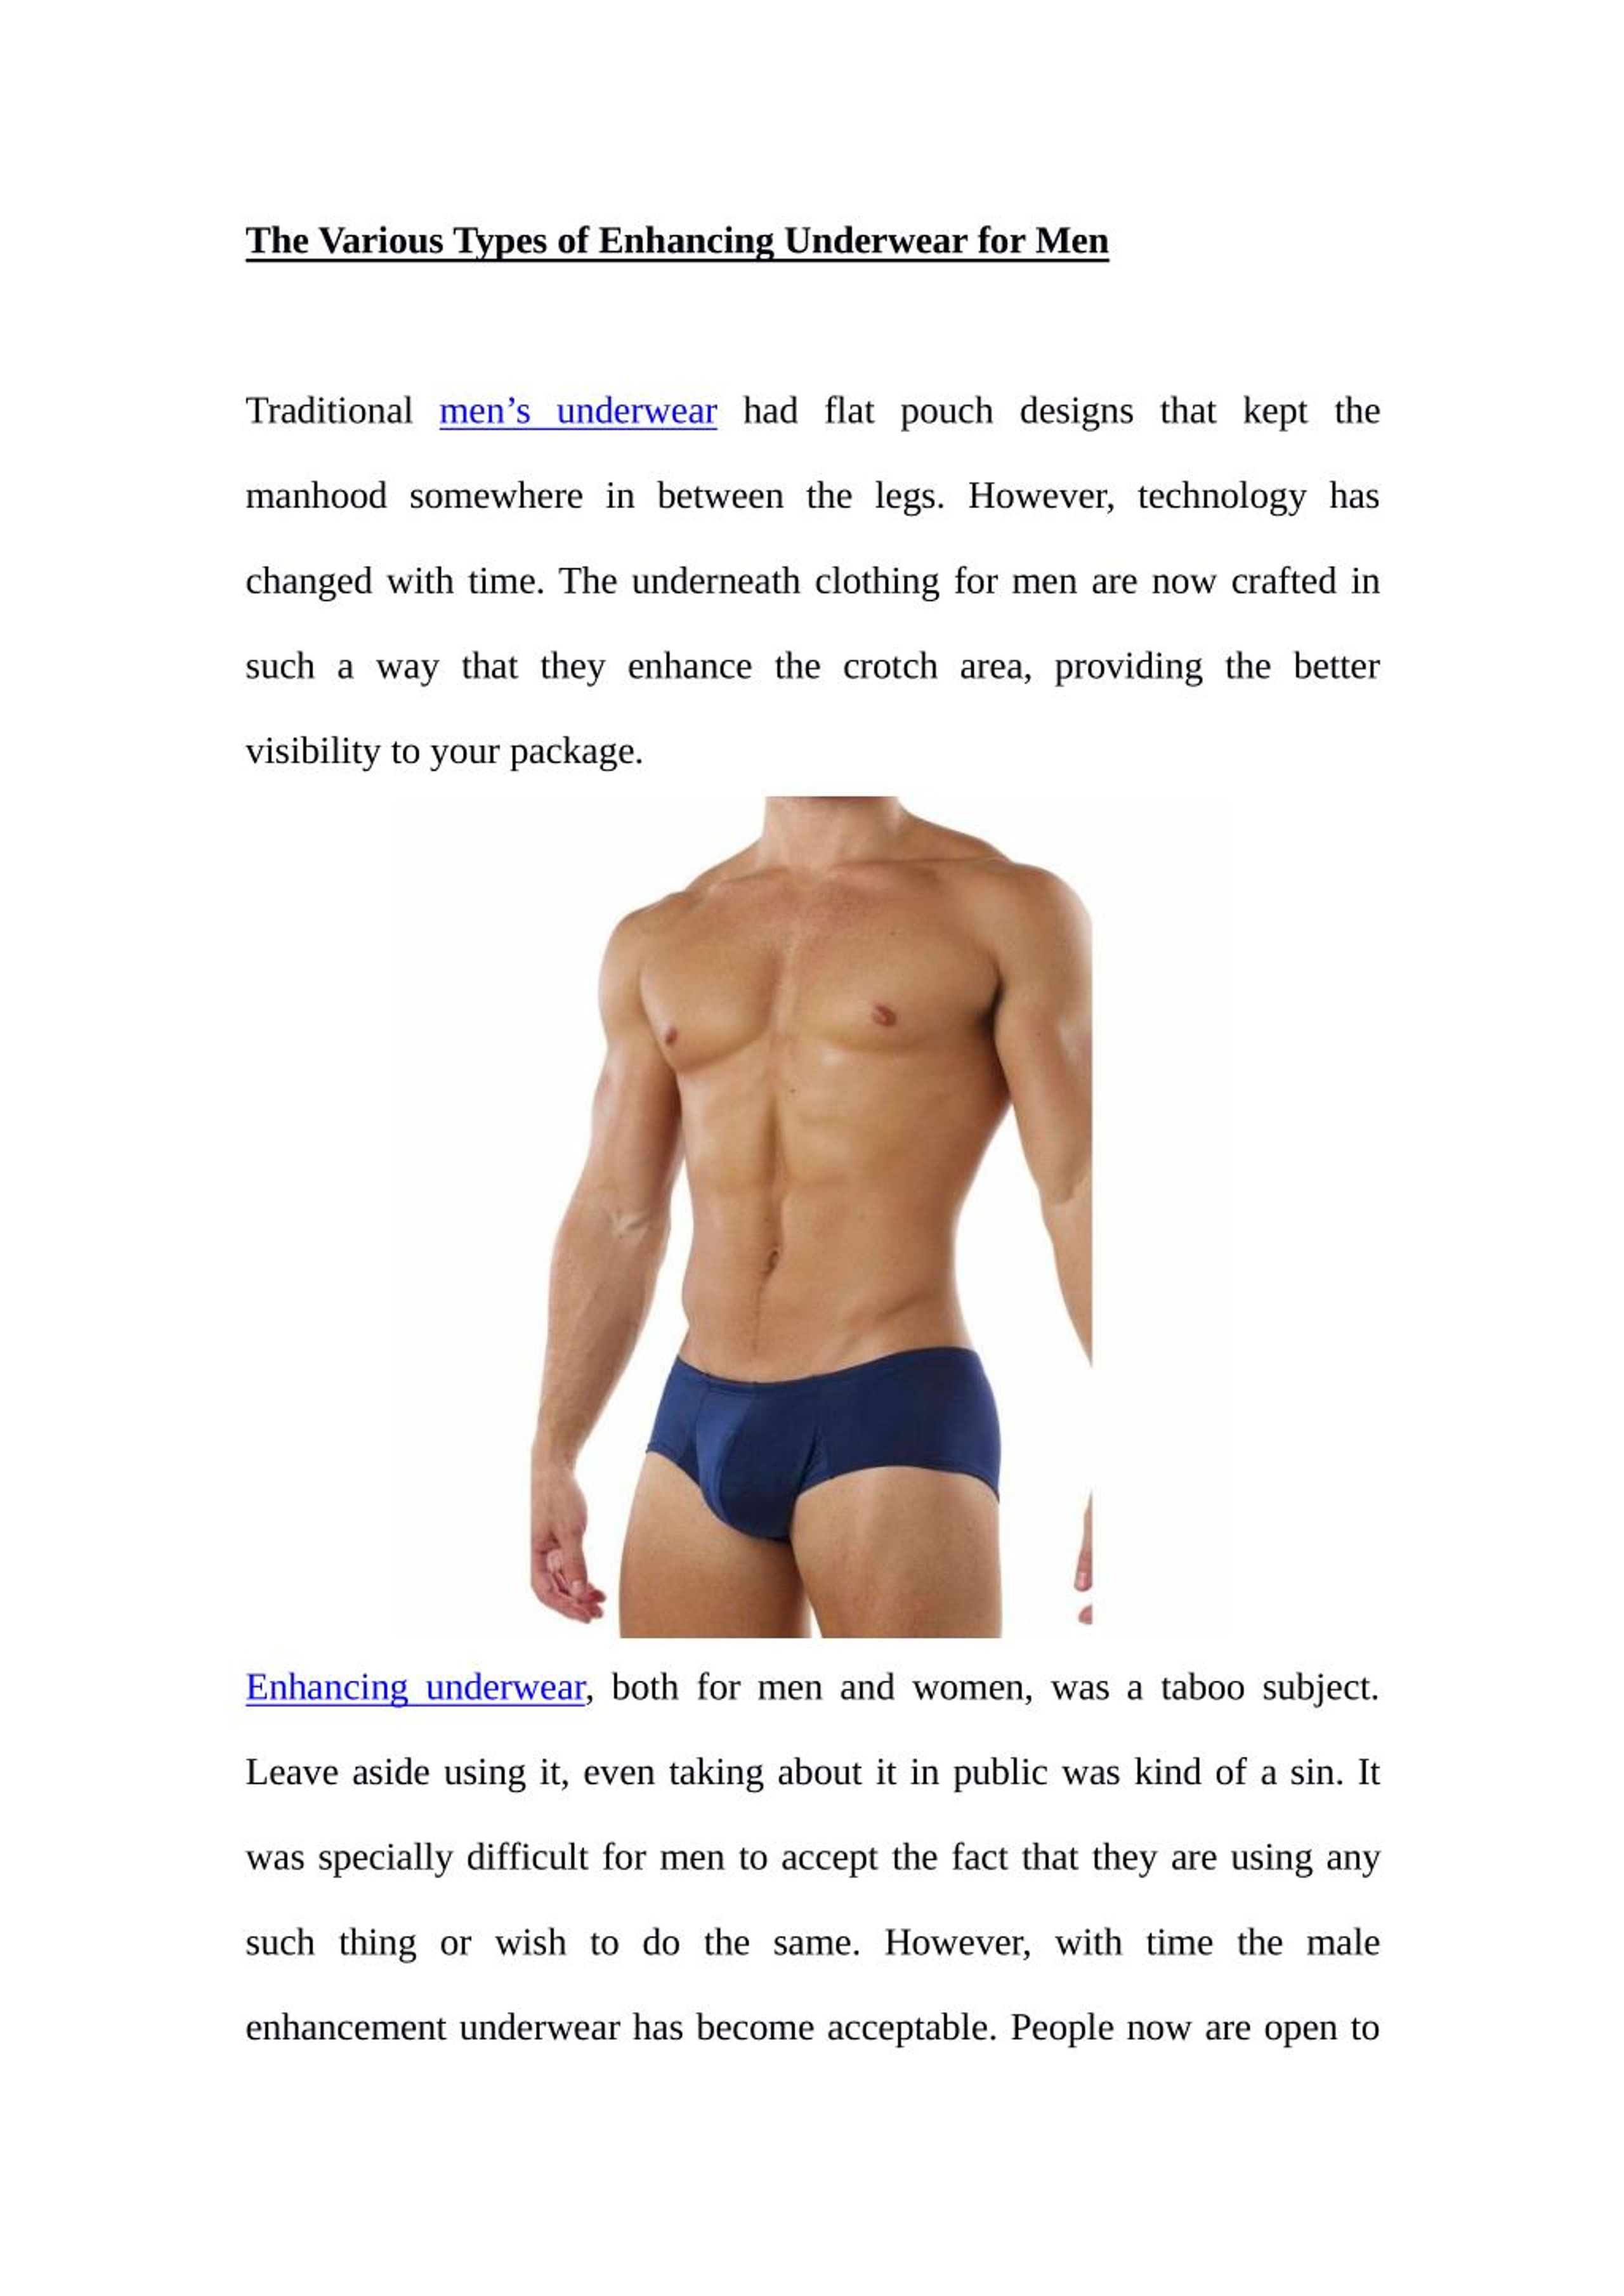 PPT - The Various Types of Enhancing Underwear for Men PowerPoint  Presentation - ID:7400781